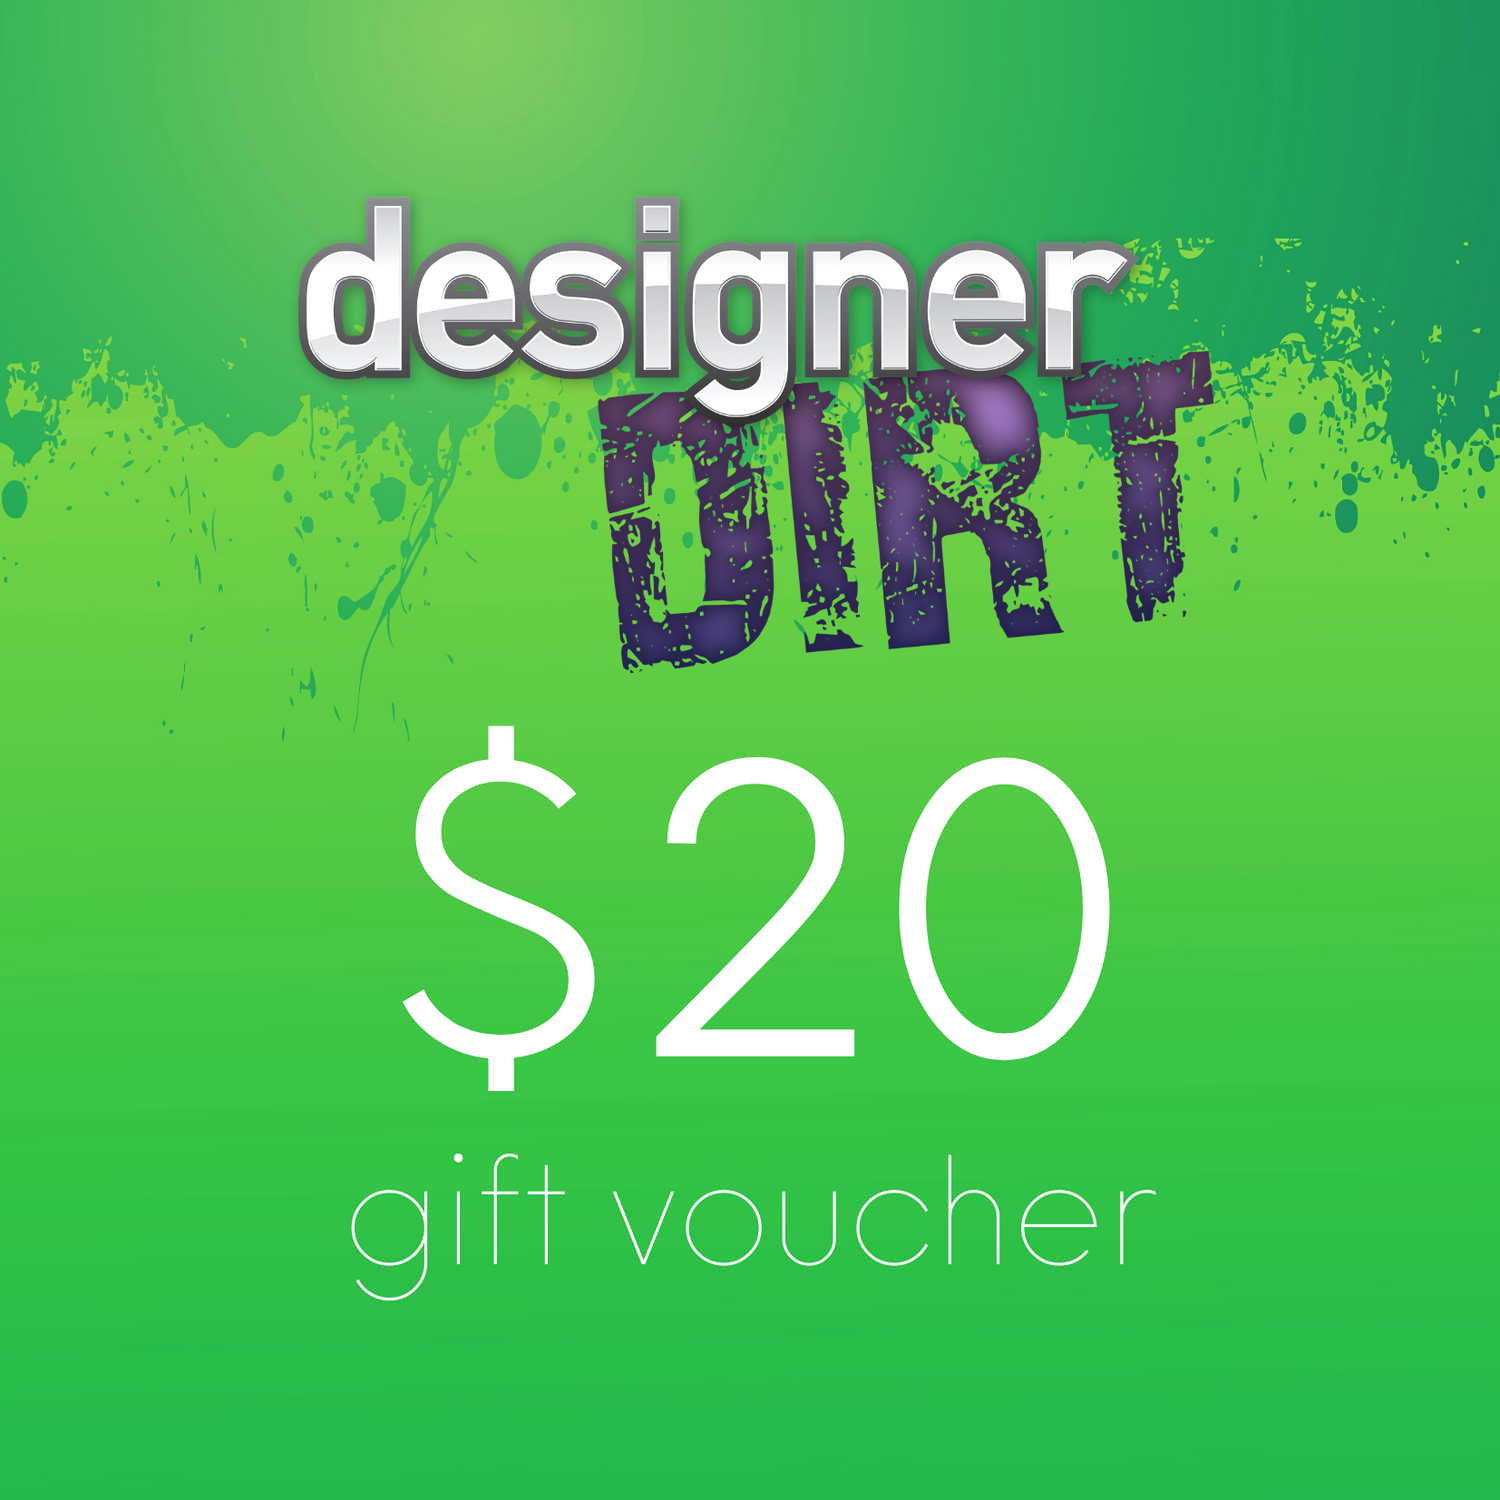 Designer Dirt $20 gift card. Buy a gift certificate or voucher for a present if you can't decide what to buy